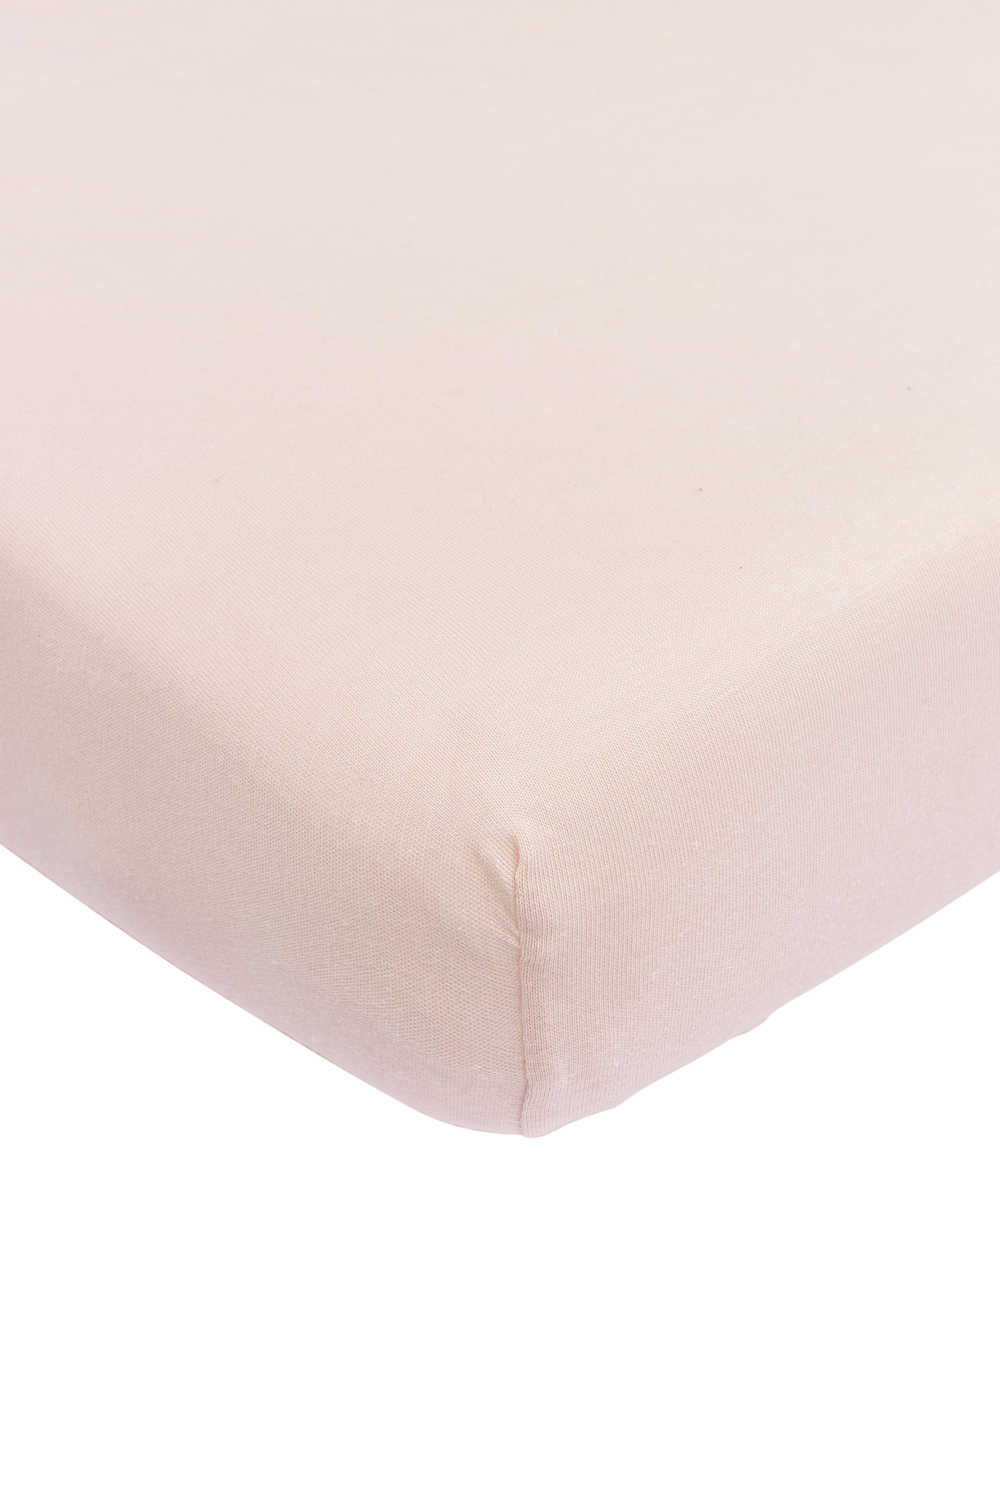 Jersey Fitted Sheet Cot Bed - Soft Pink - 60x120cm